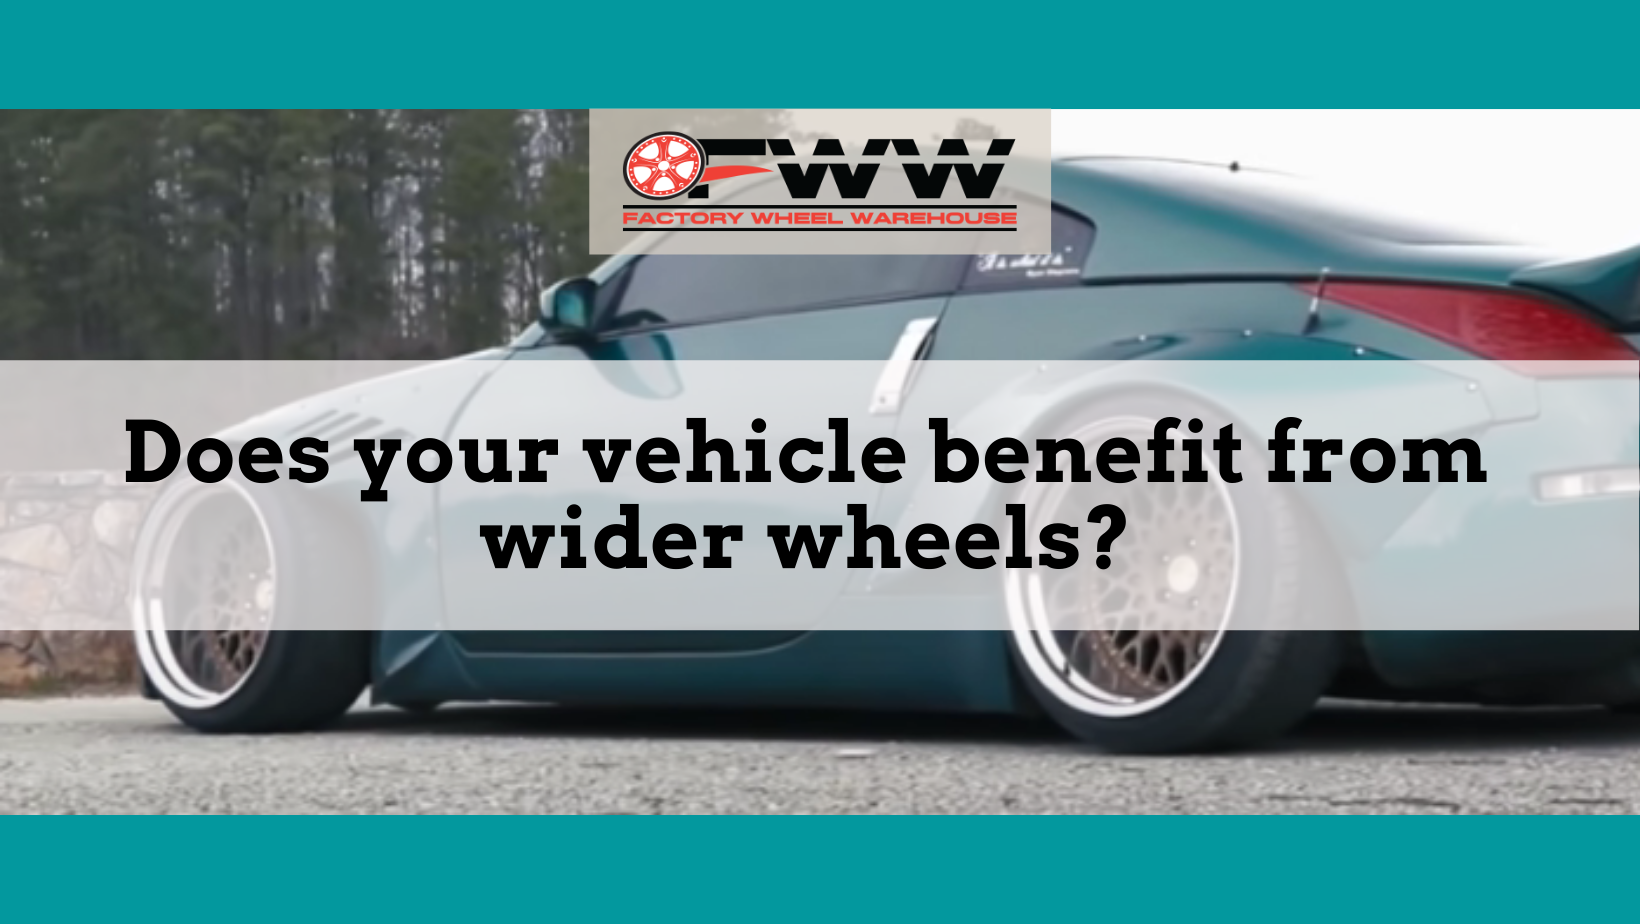 Does your vehicle benefit from wider wheels?